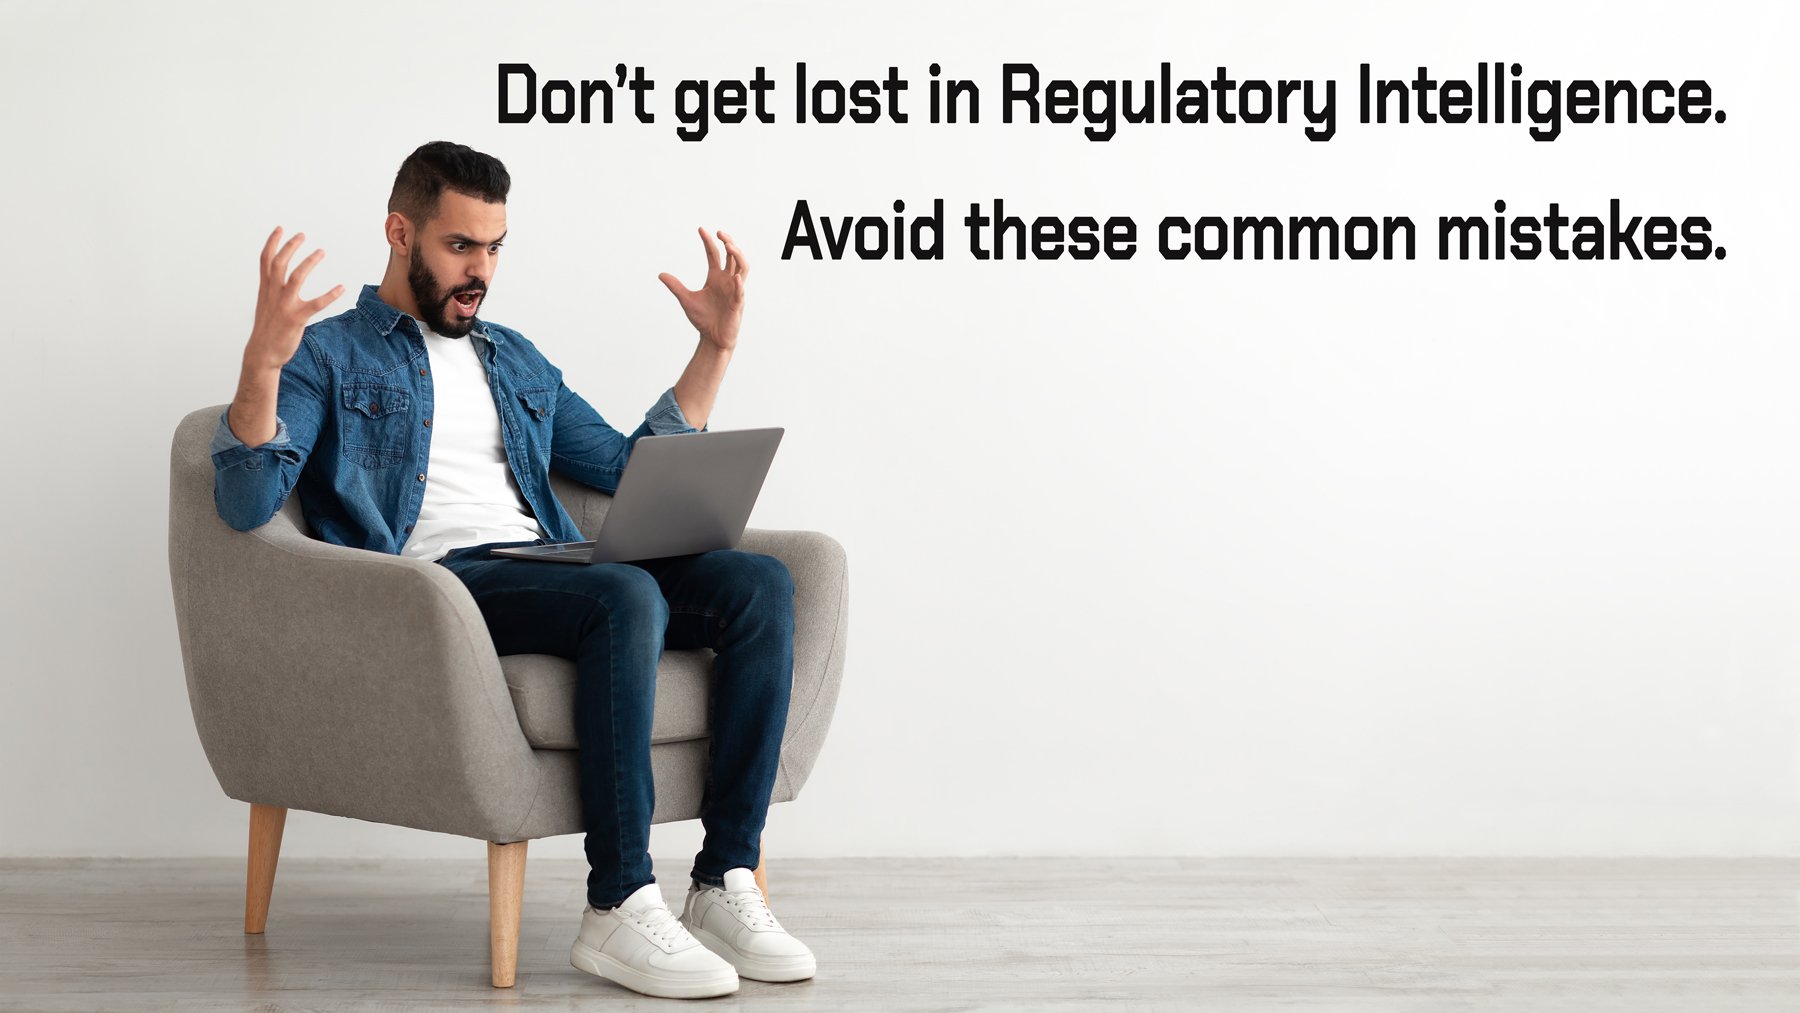 5 Common Regulatory Intelligence Mistakes and How to Avoid Them with RegIntel